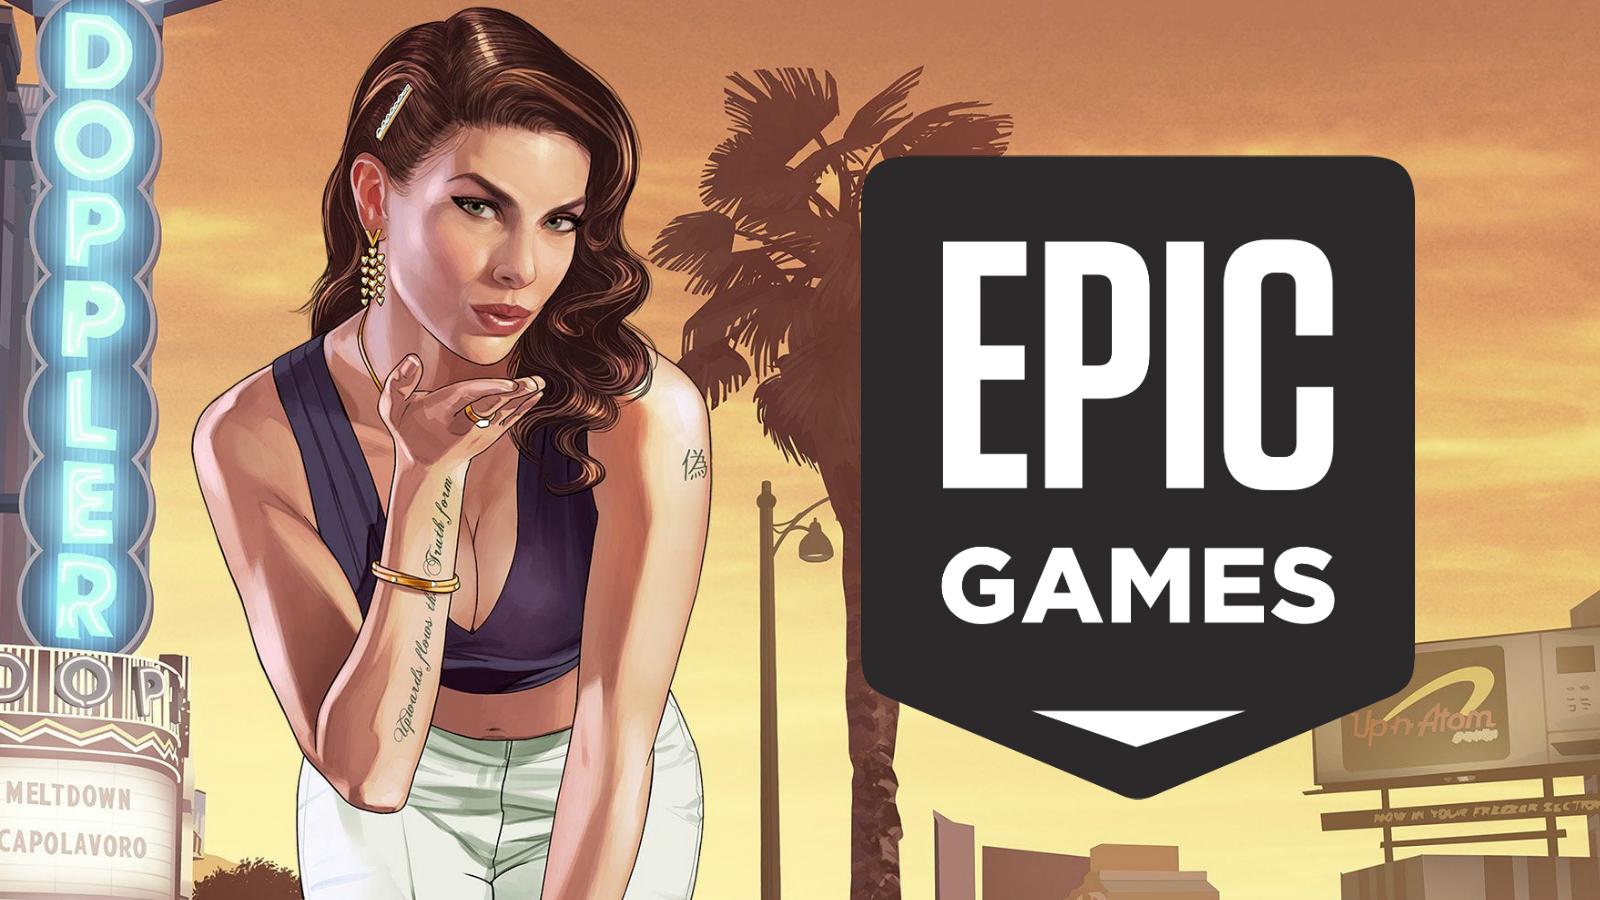 GTA 5 is free to download and keep on Epic Games Store now